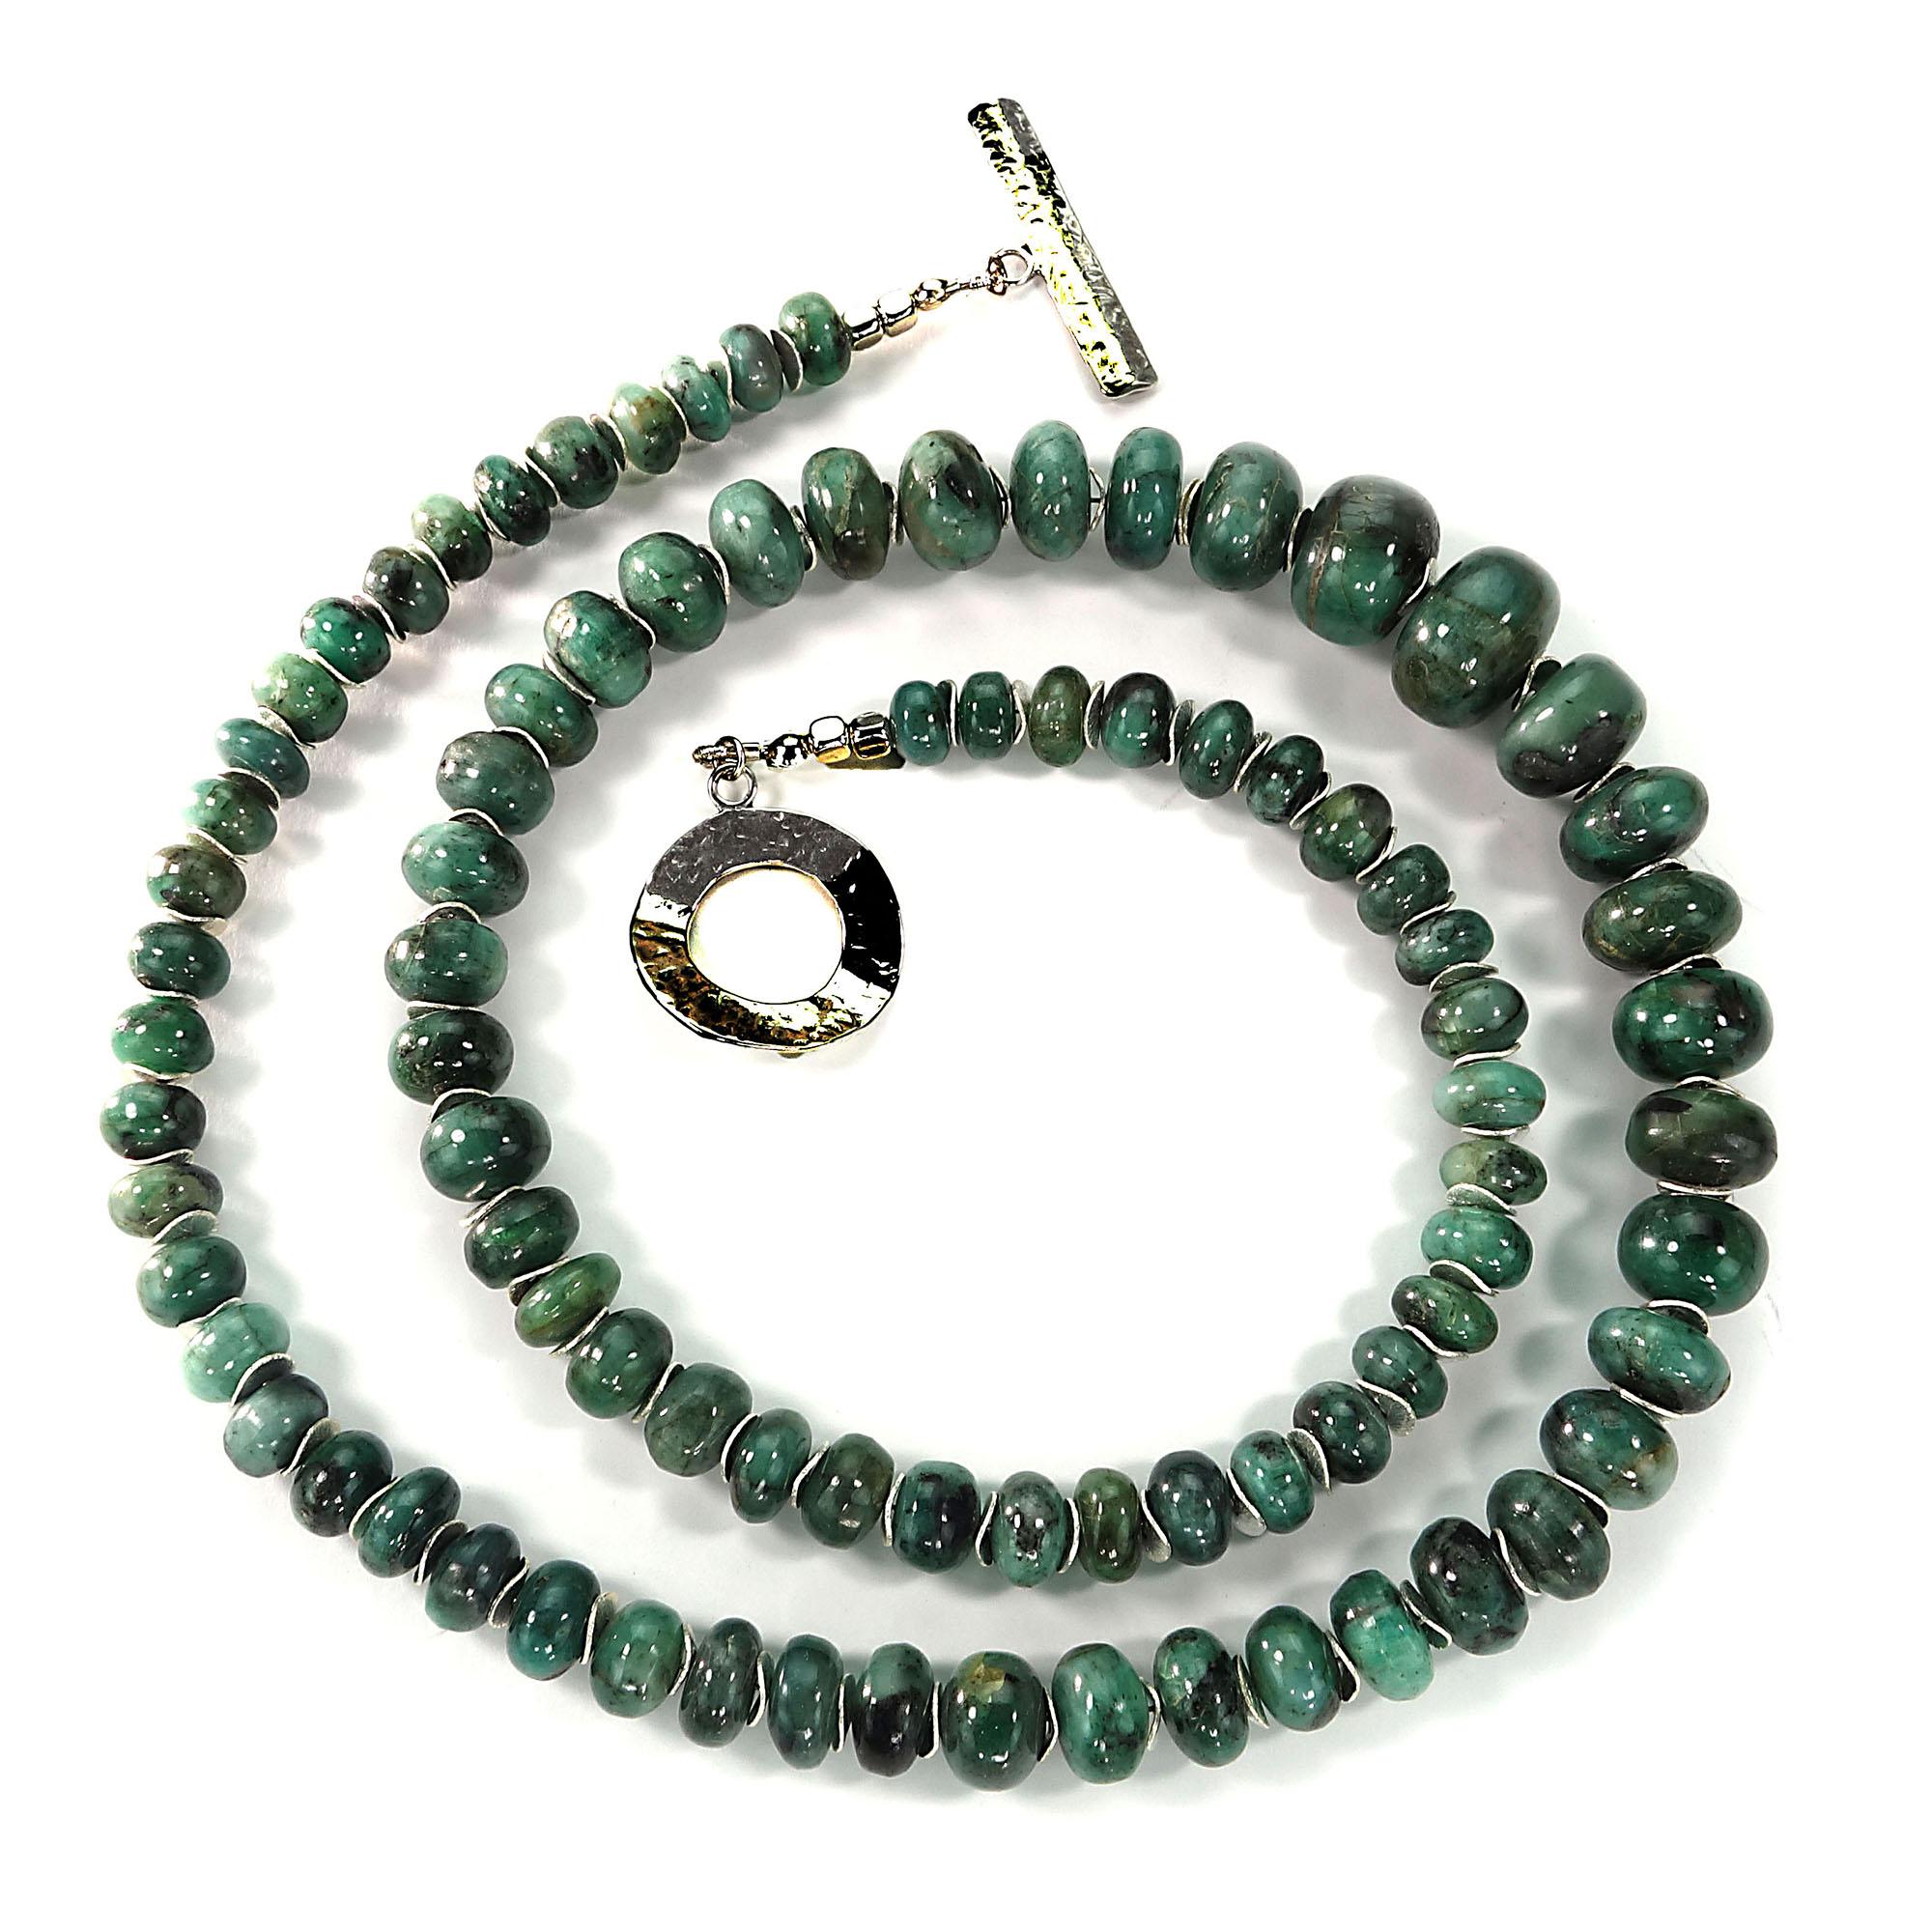 Graduated Emerald in matrix 8-17MM rondelles enhanced with silver tone flutters and a Sterling Silver toggle clasp.  This handmade necklace is a substantial 27 inch length.  Emerald is the May birthstone.